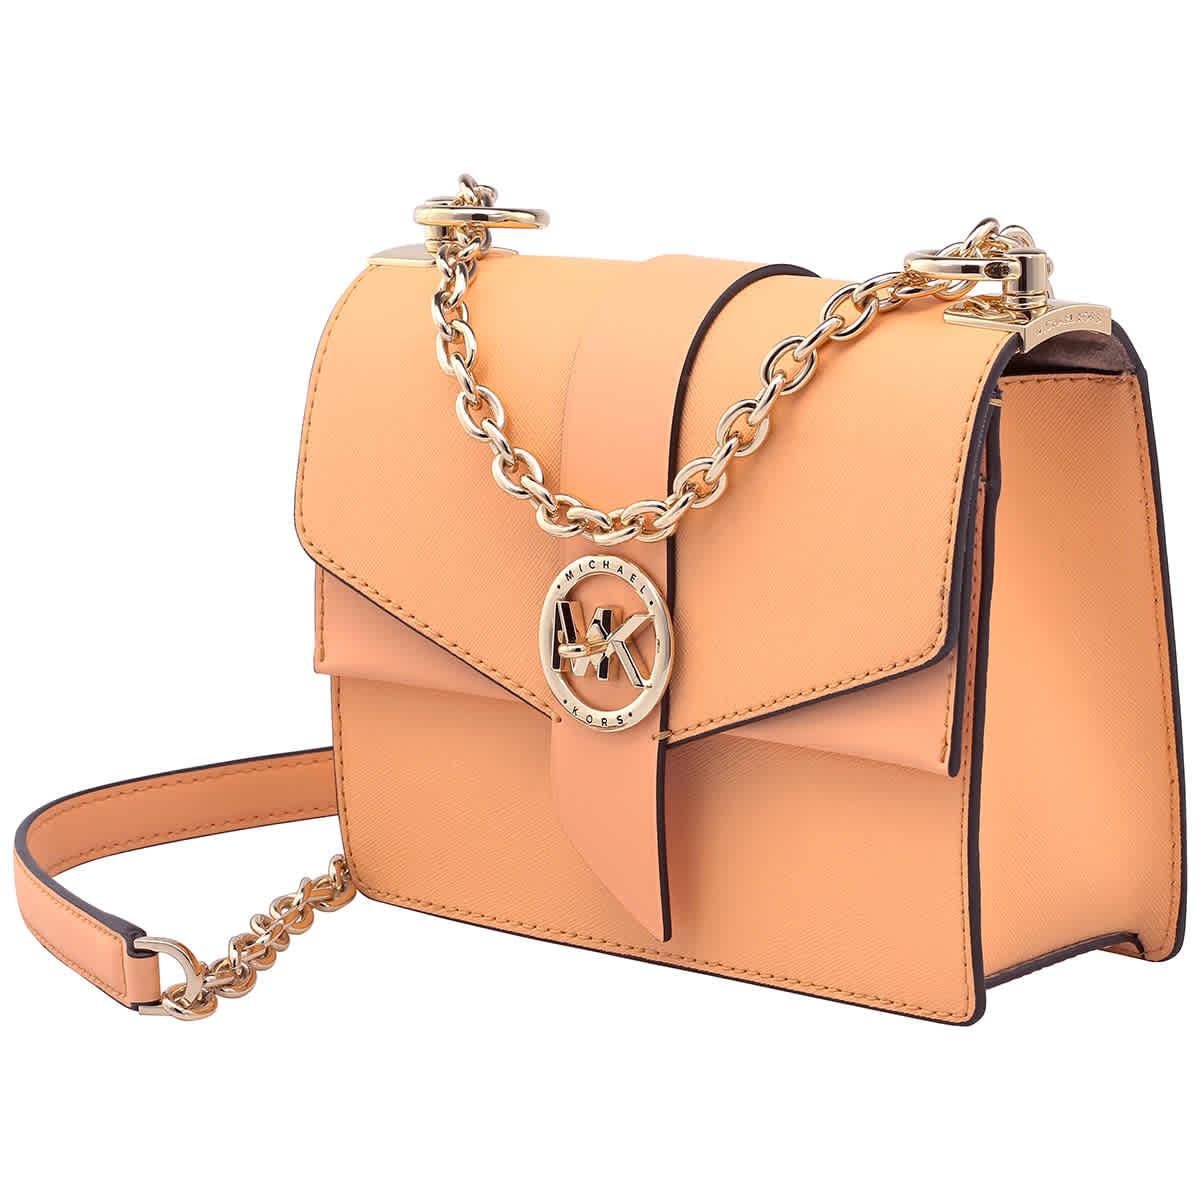 Michael Kors Small Greenwich Saffiano Leather Crossbody in Pink